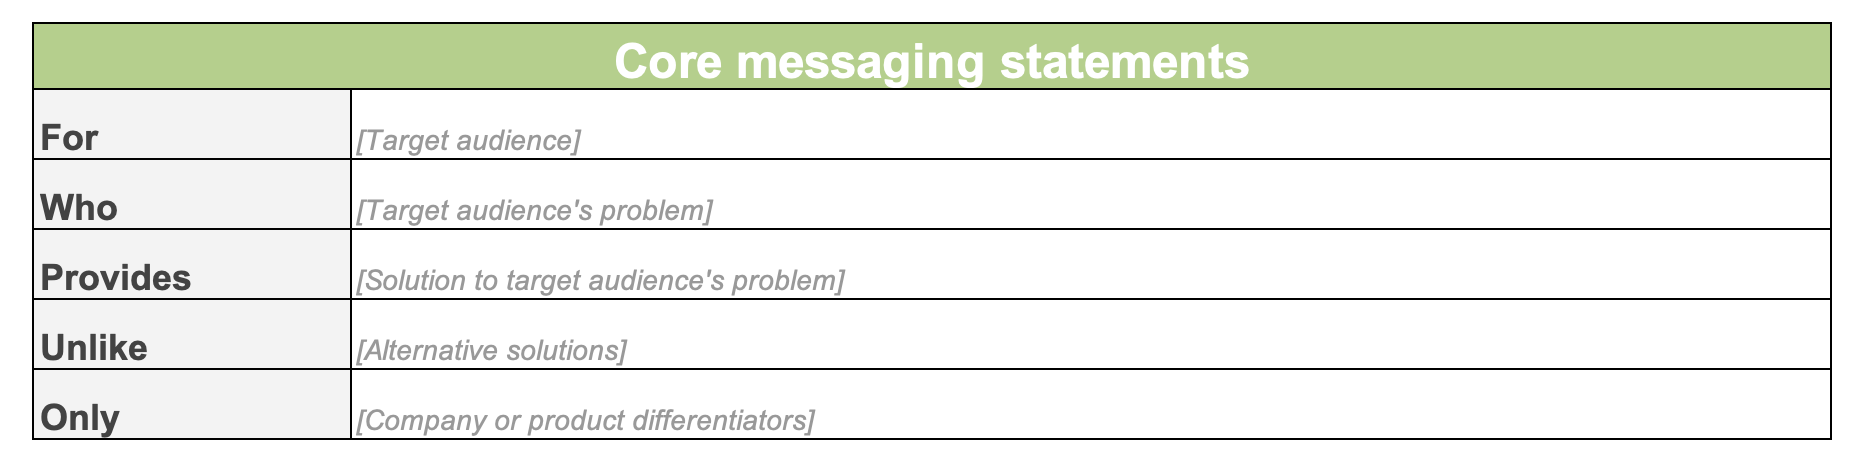 Core messaging statements